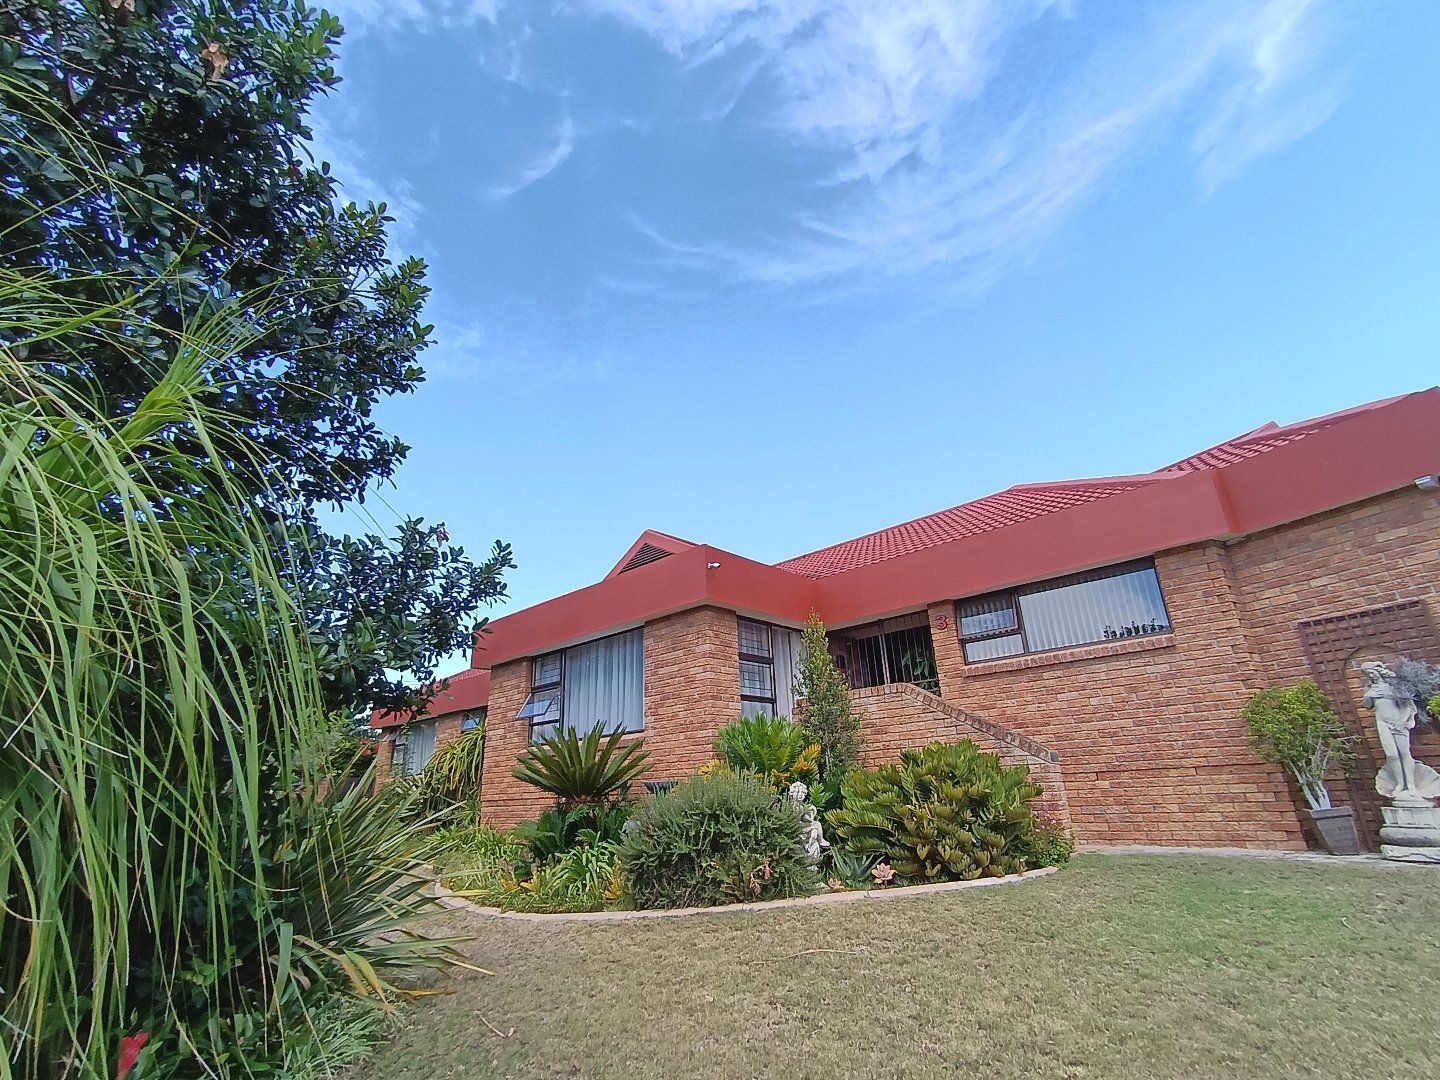 6 Bedroom Property for Sale in Fraaiuitsig Western Cape